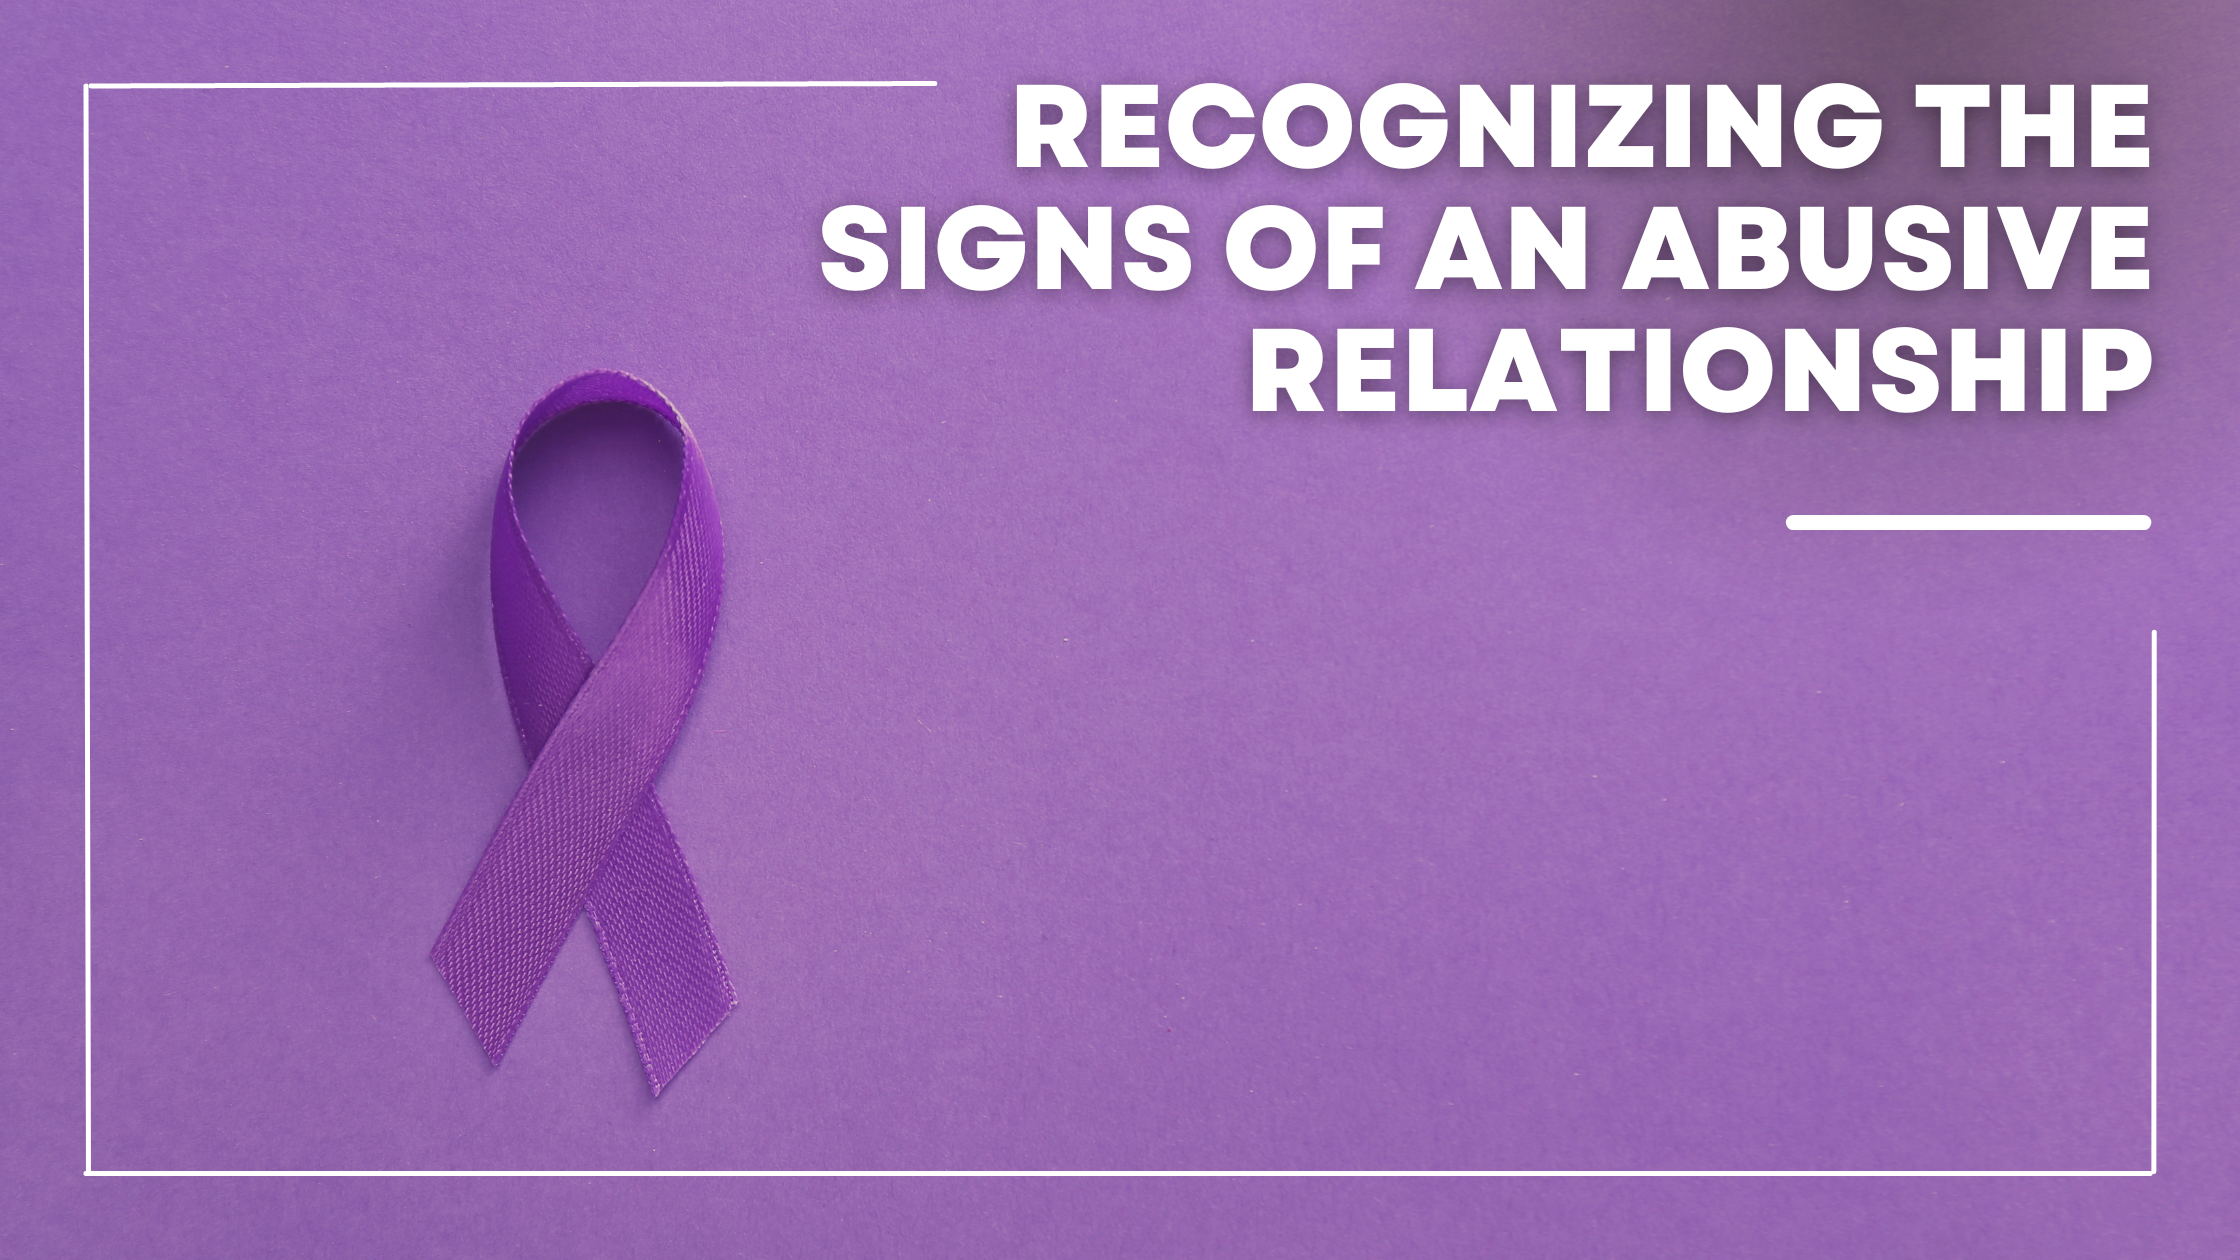 Recognizing the Signs of an Abusive Relationship